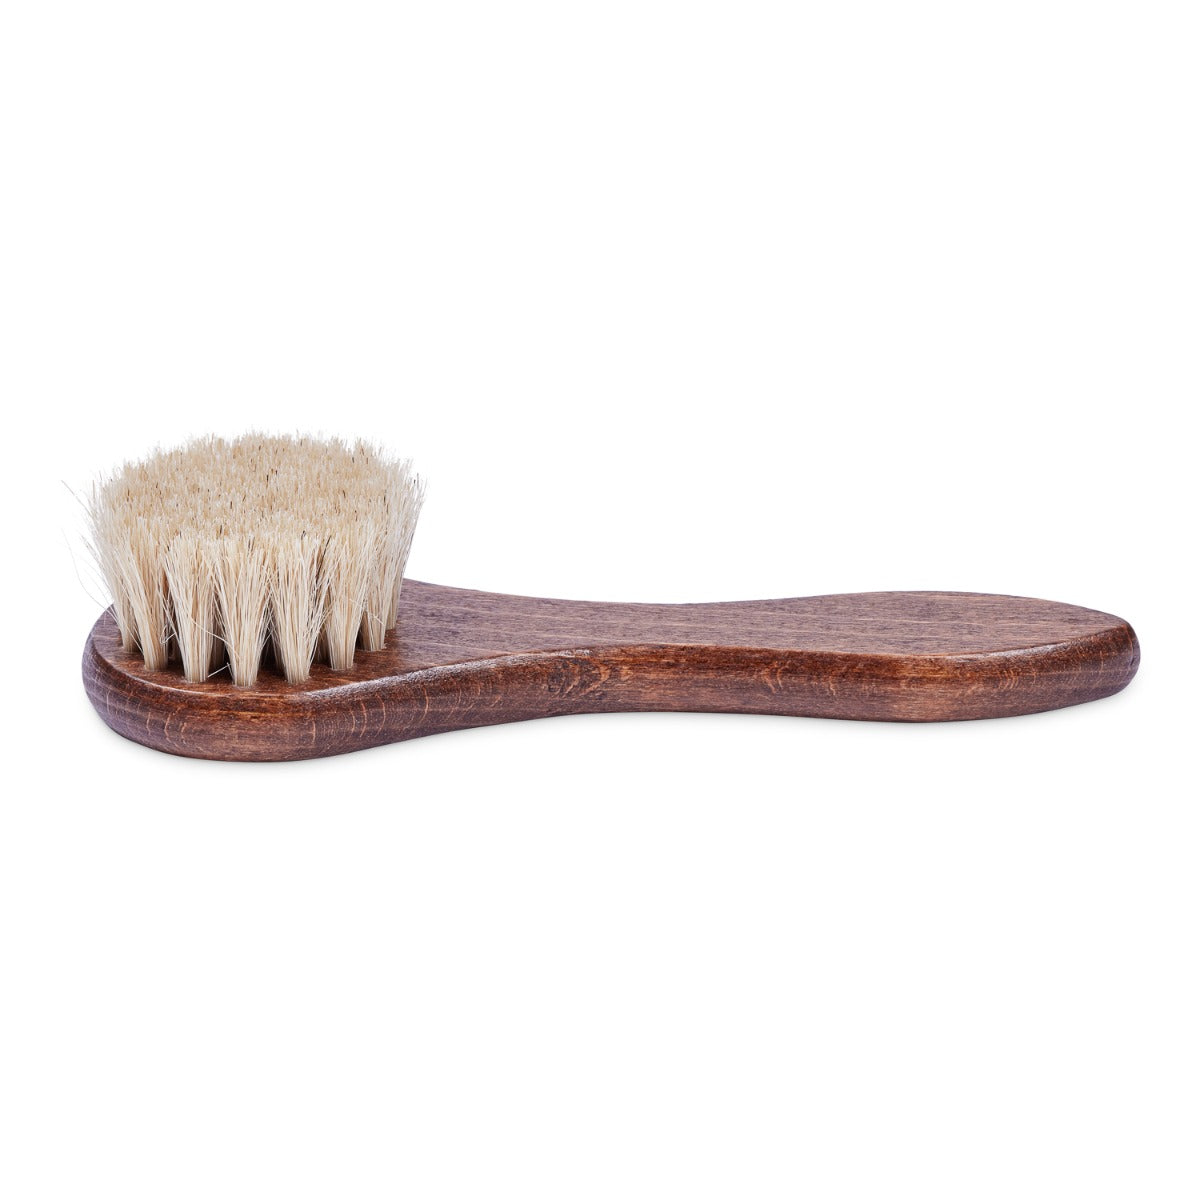 A Extra-Large Shoe Cleaning Dauber with bristles on a white background from KirbyAllison.com.